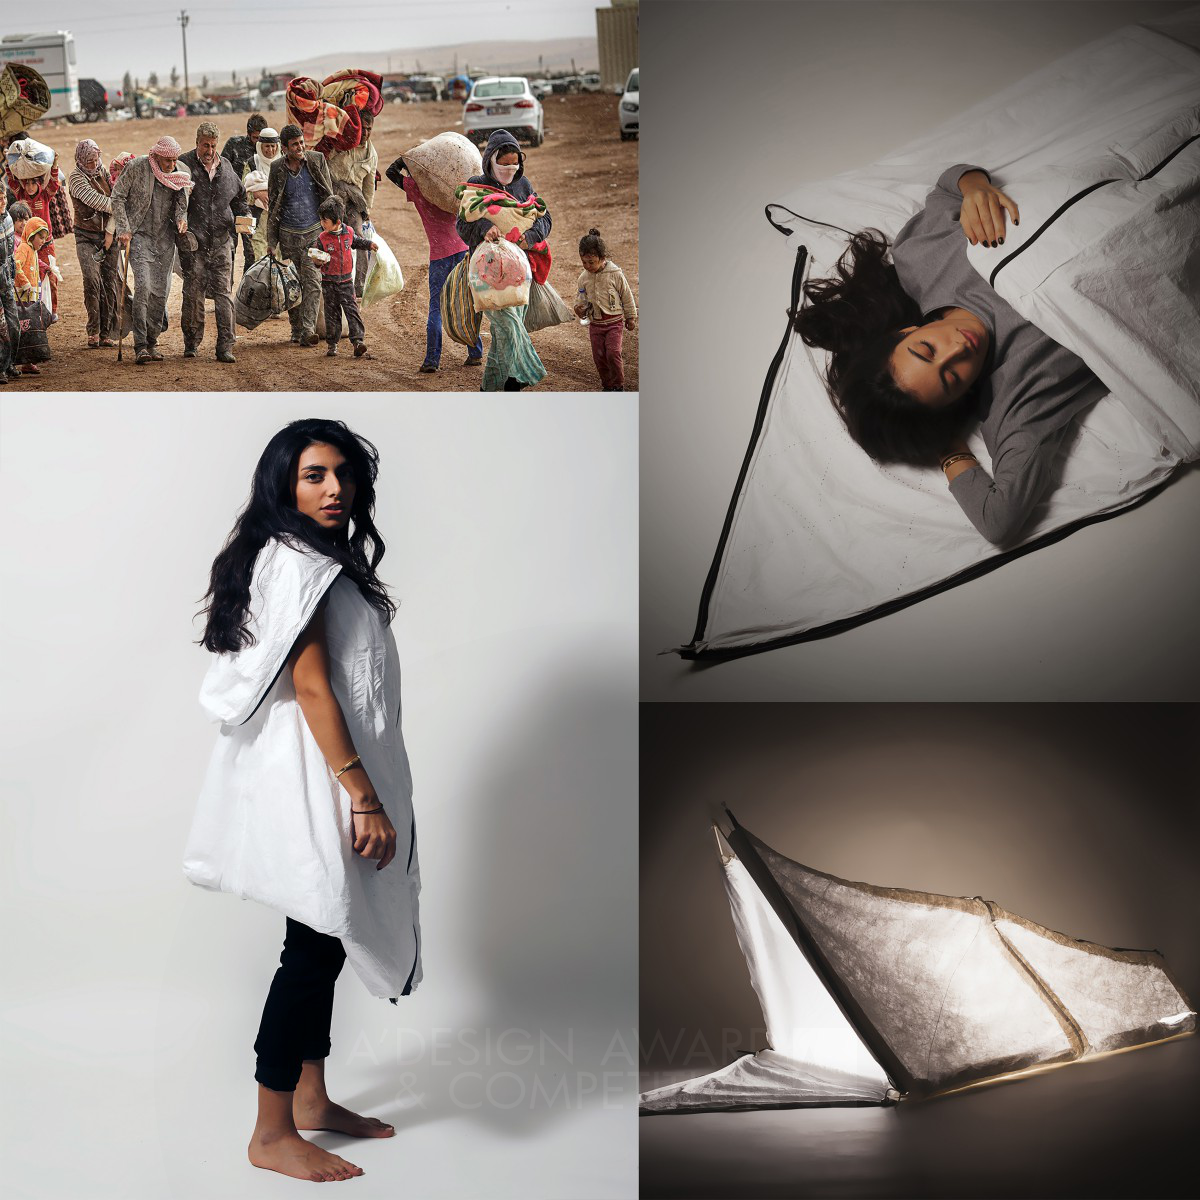 Refugee Wearable Shelter wearable tent, jacket, coat for refugees by Dr Harriet Harriss